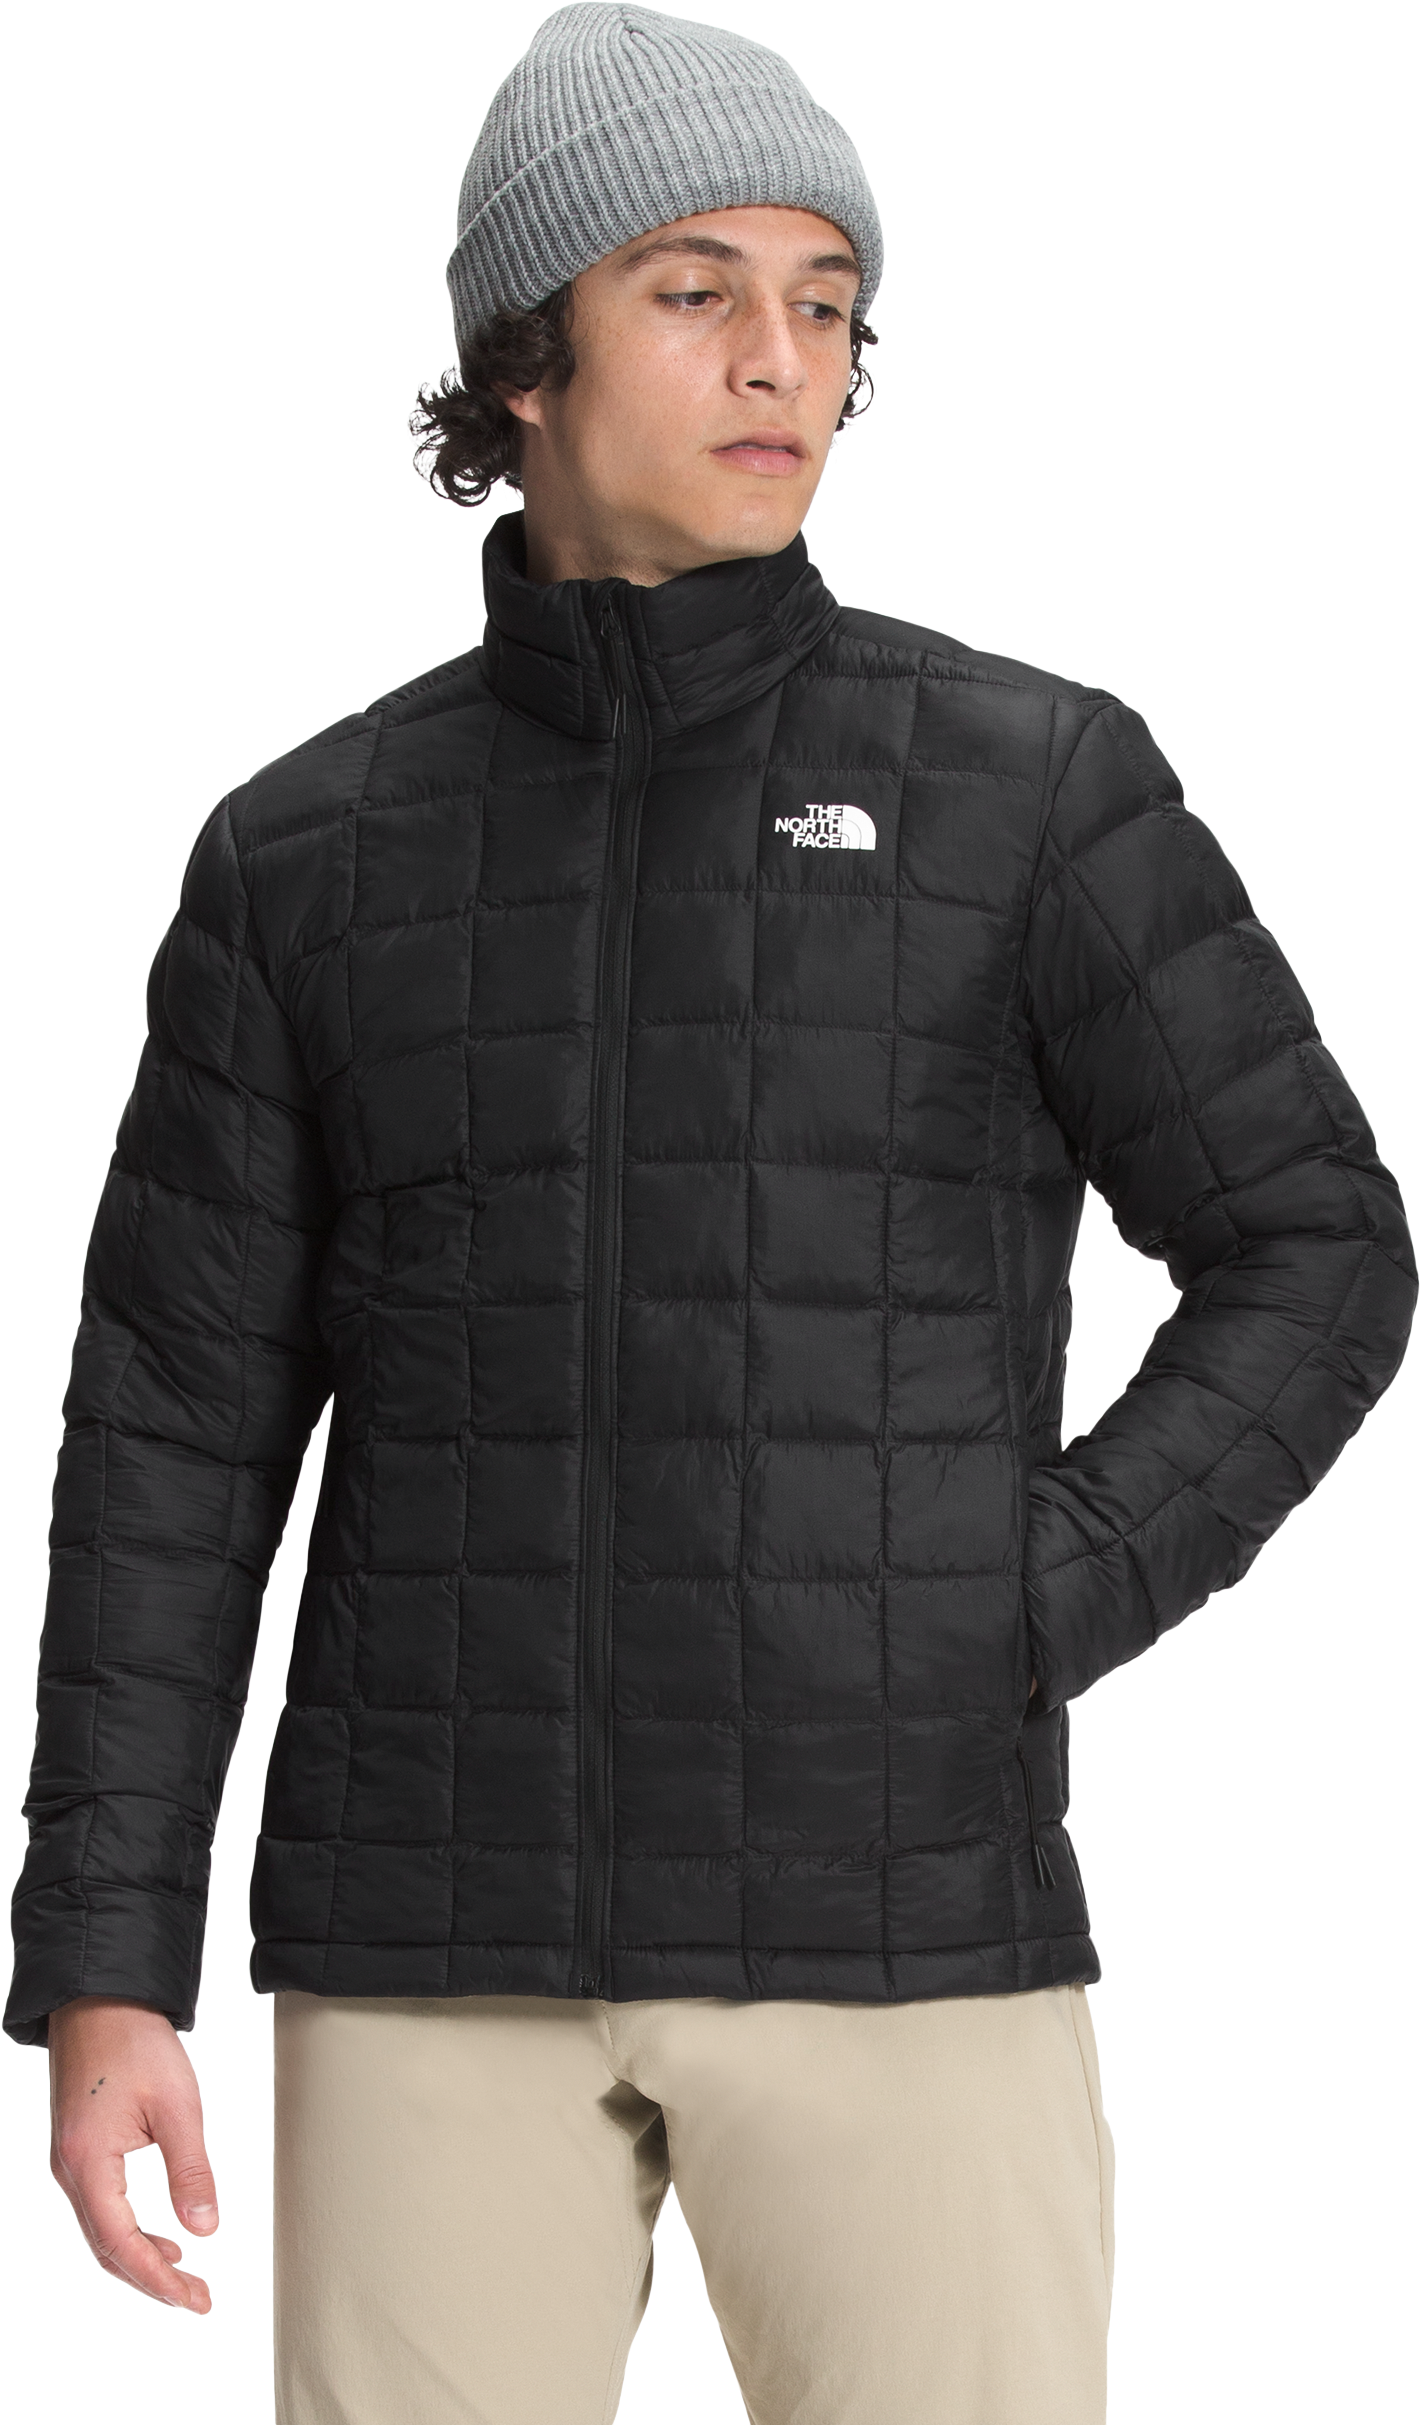 The North Face ThermoBall Eco Quilted Jacket for Men - TNF Black - 3XL